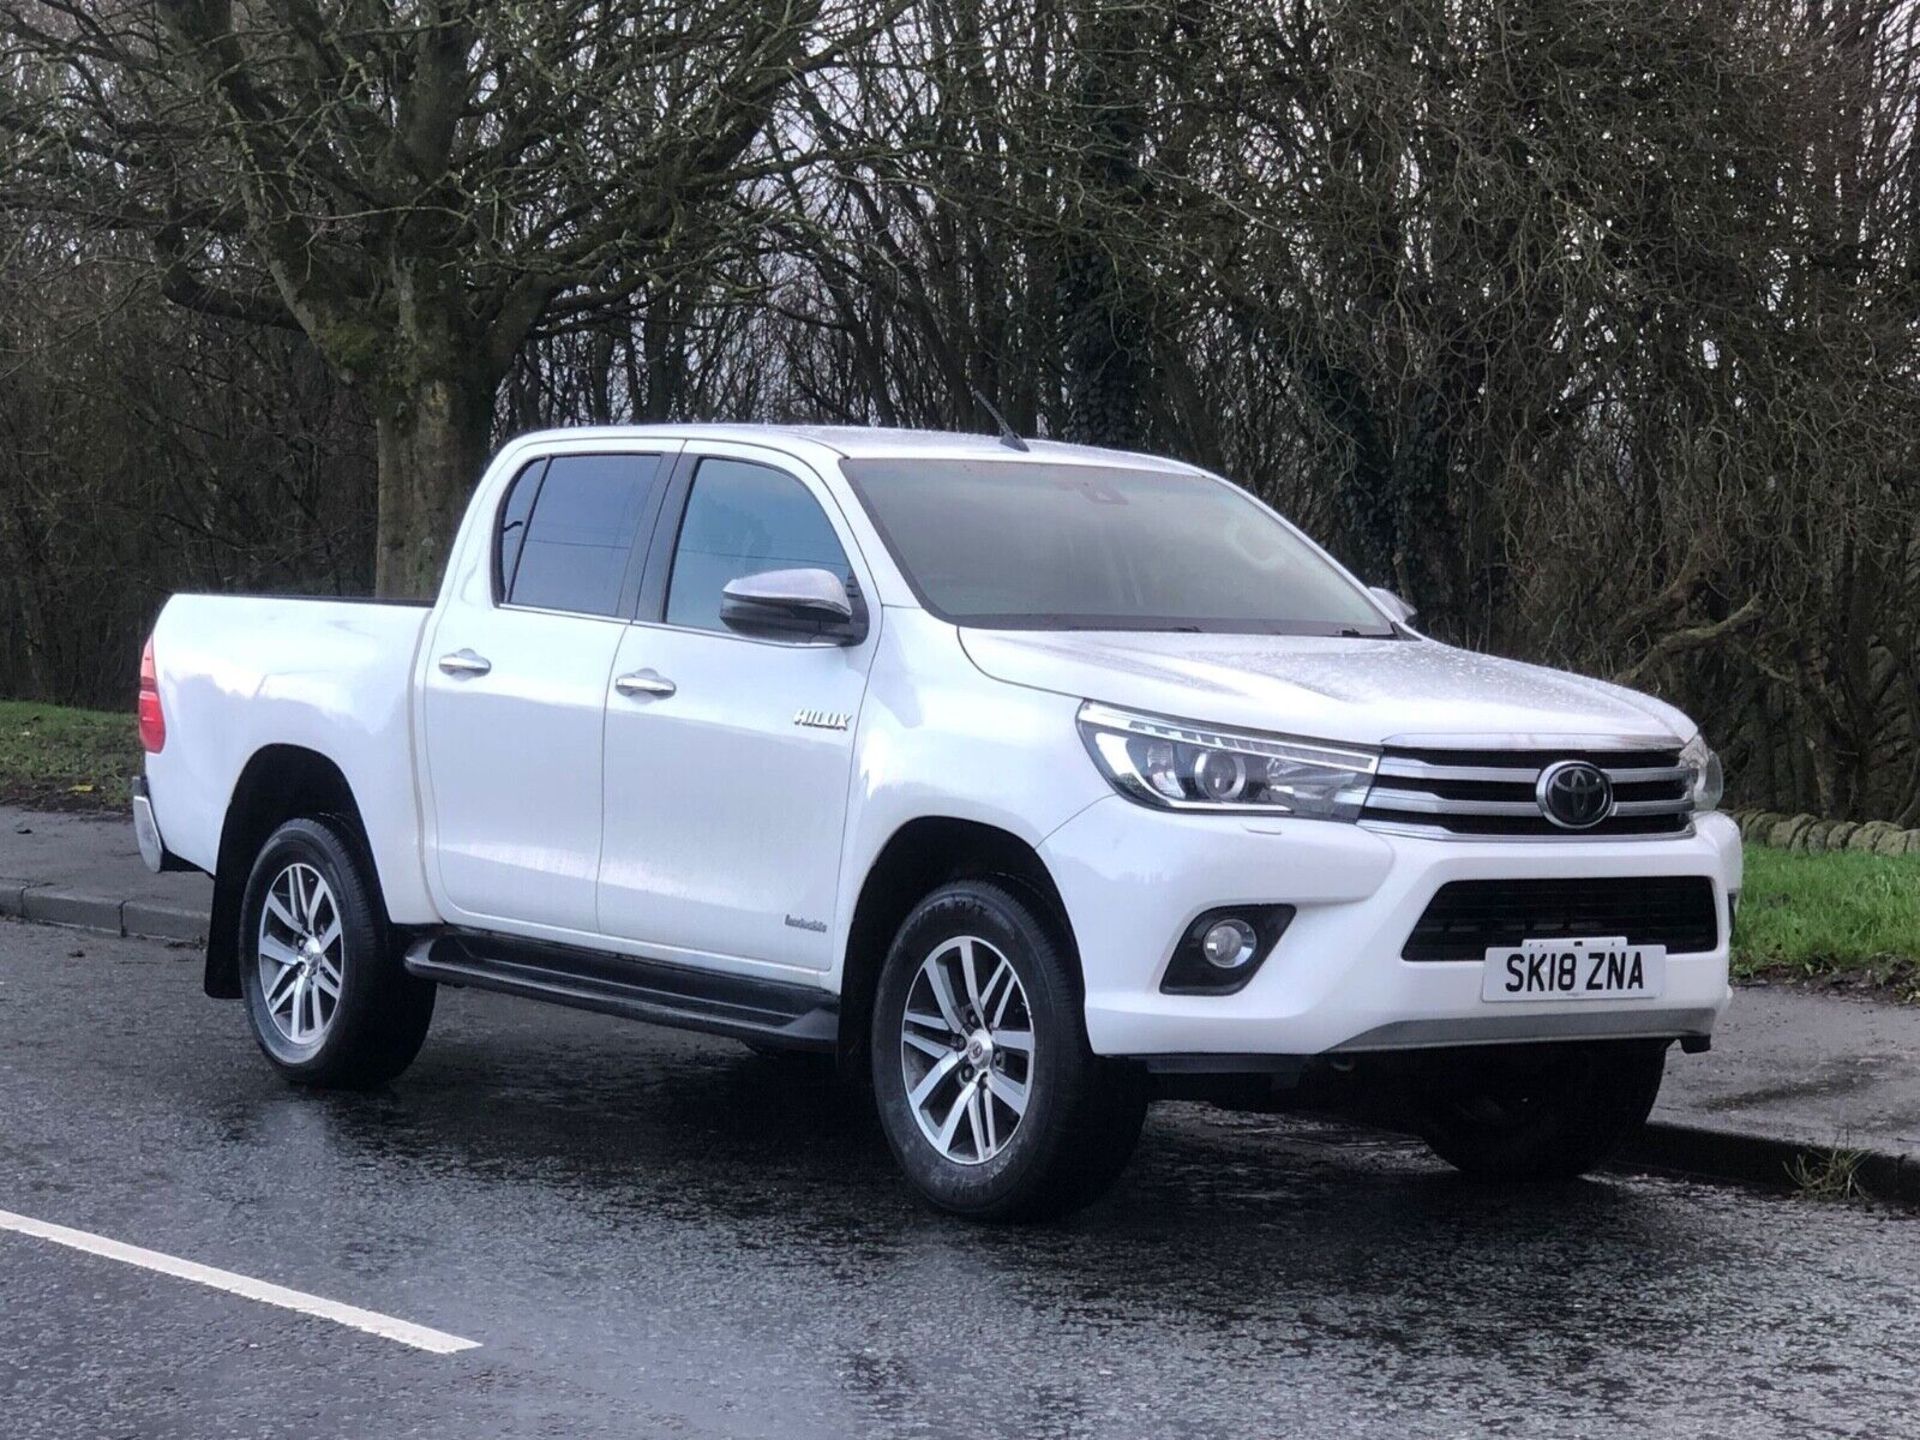 2018/18 TOYOTA HILUX 2.4 INVINCIBLE DOUBLE CAB - OFF-ROAD ADVENTURE READY>>--NO VAT ON HAMMER--<< - Image 4 of 14